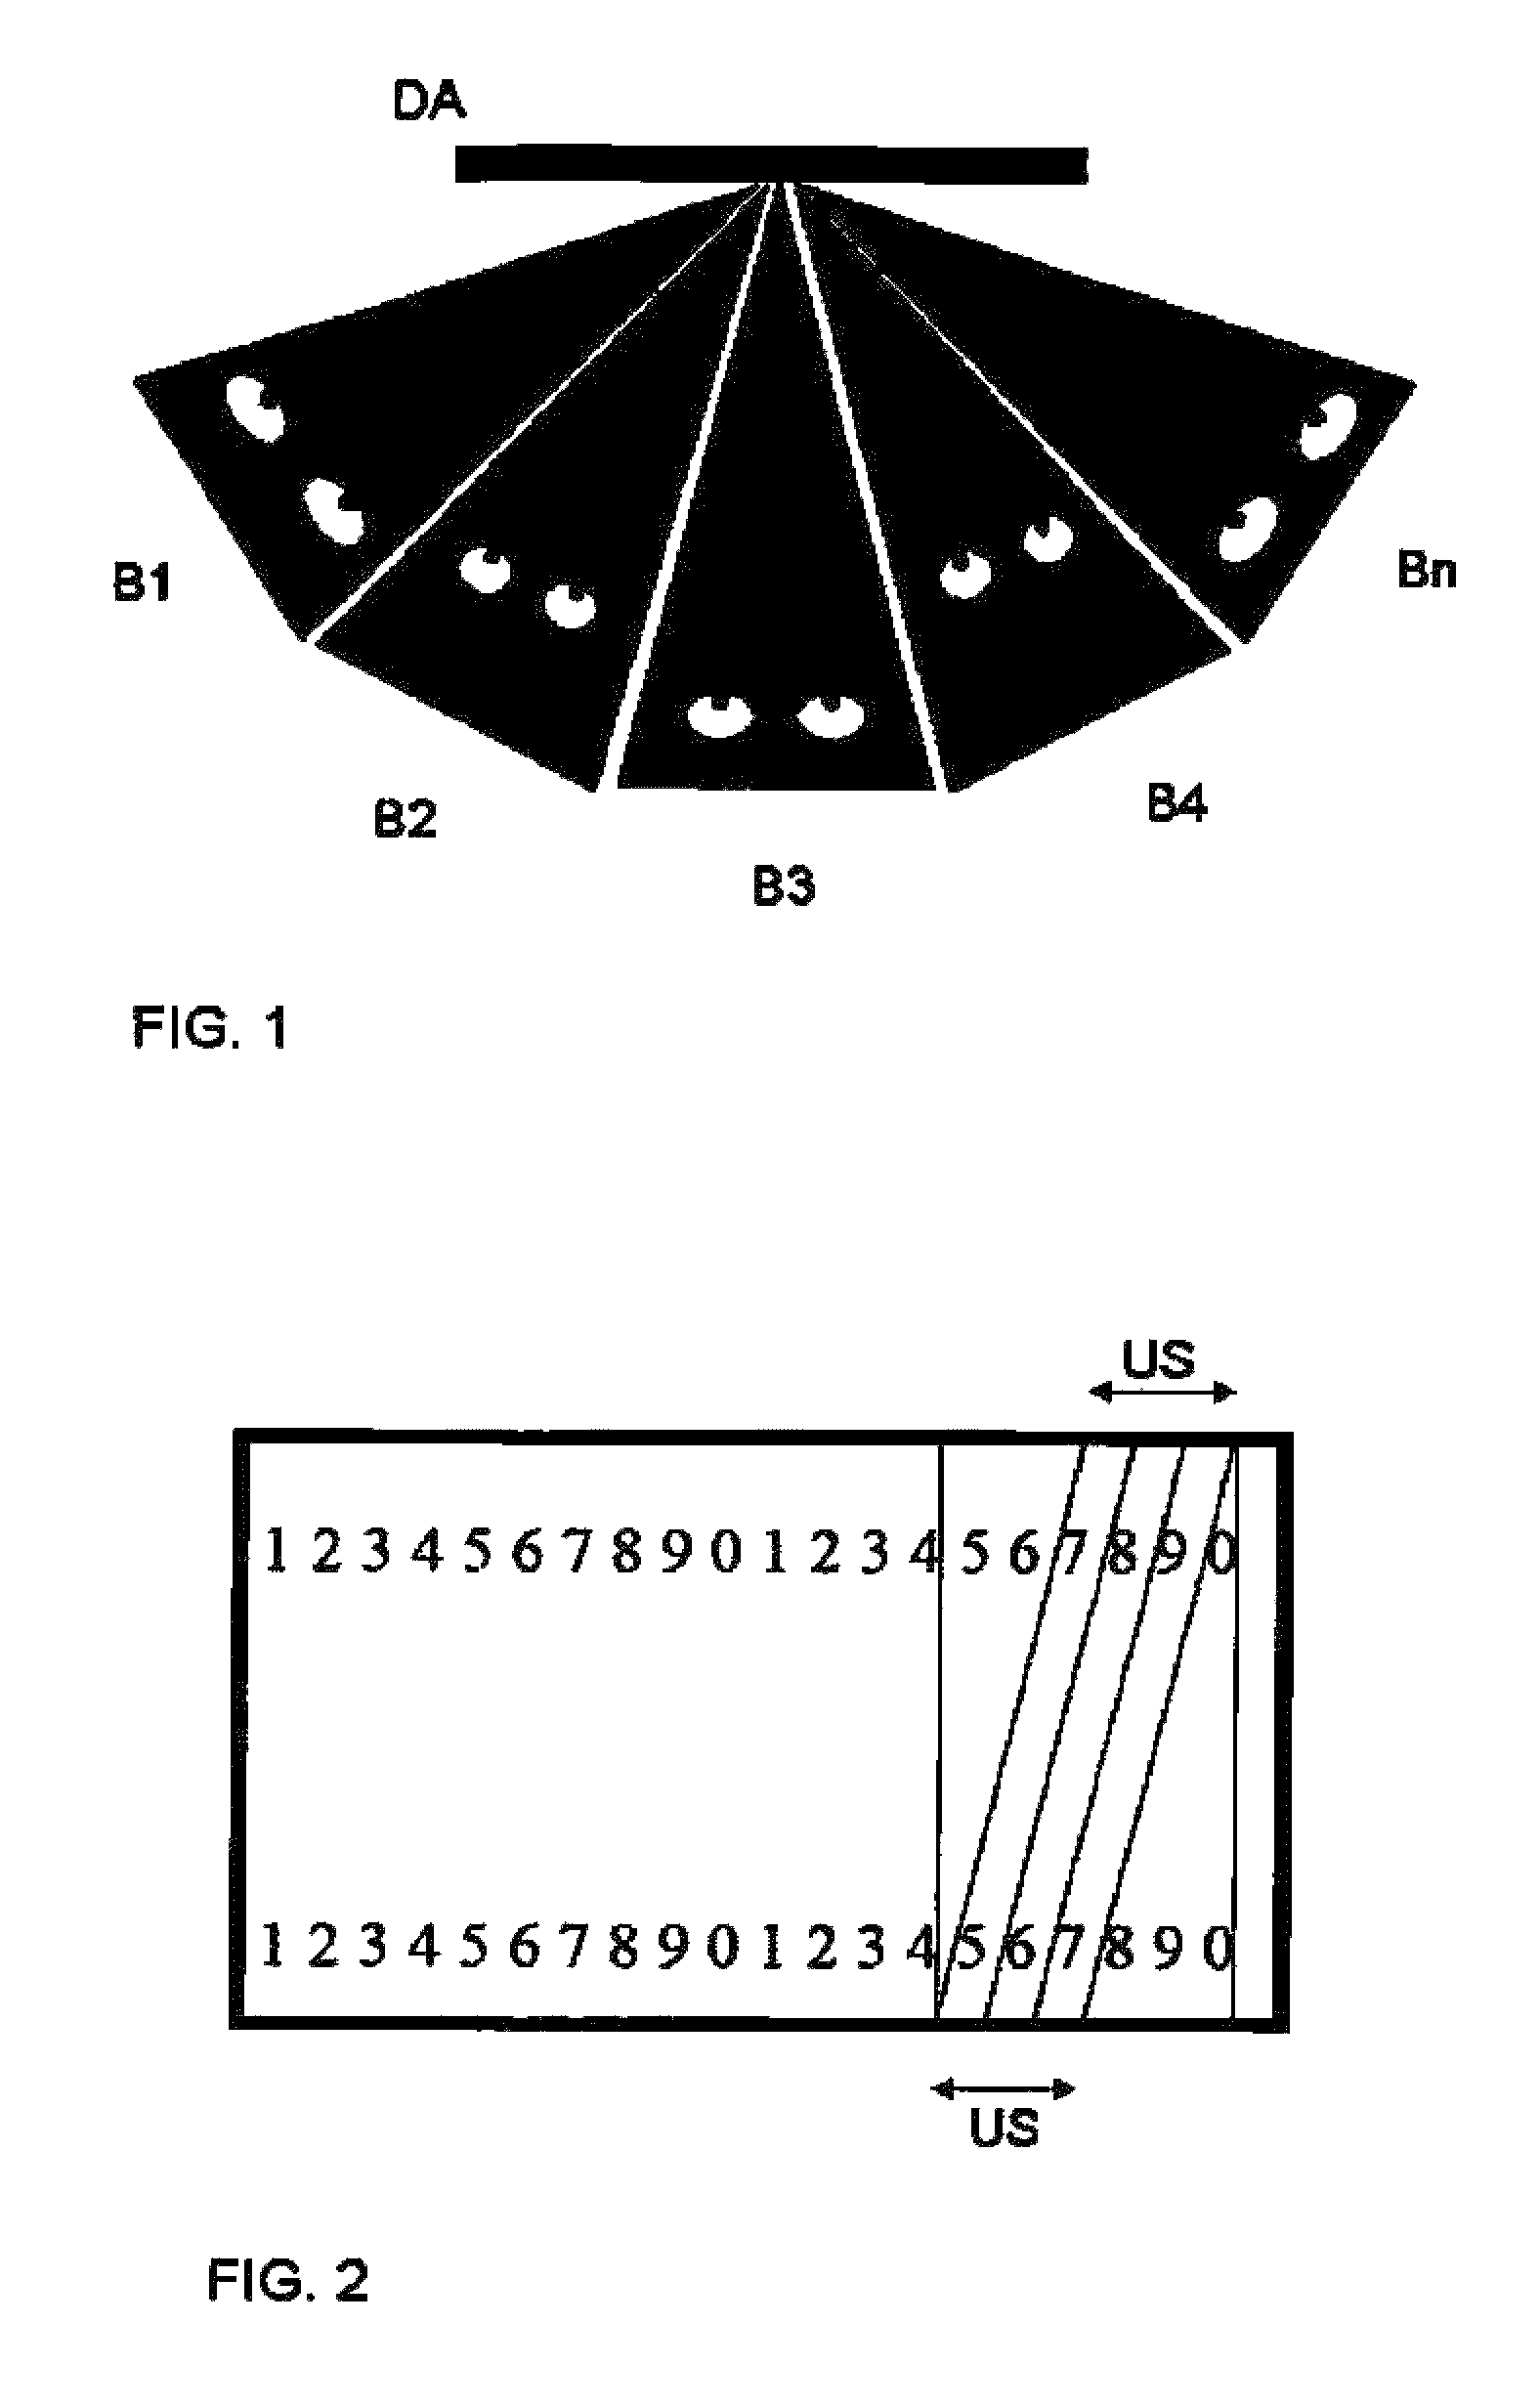 Method and devices for calibrating a display unit comprising a display and autostereoscopic adapter disc